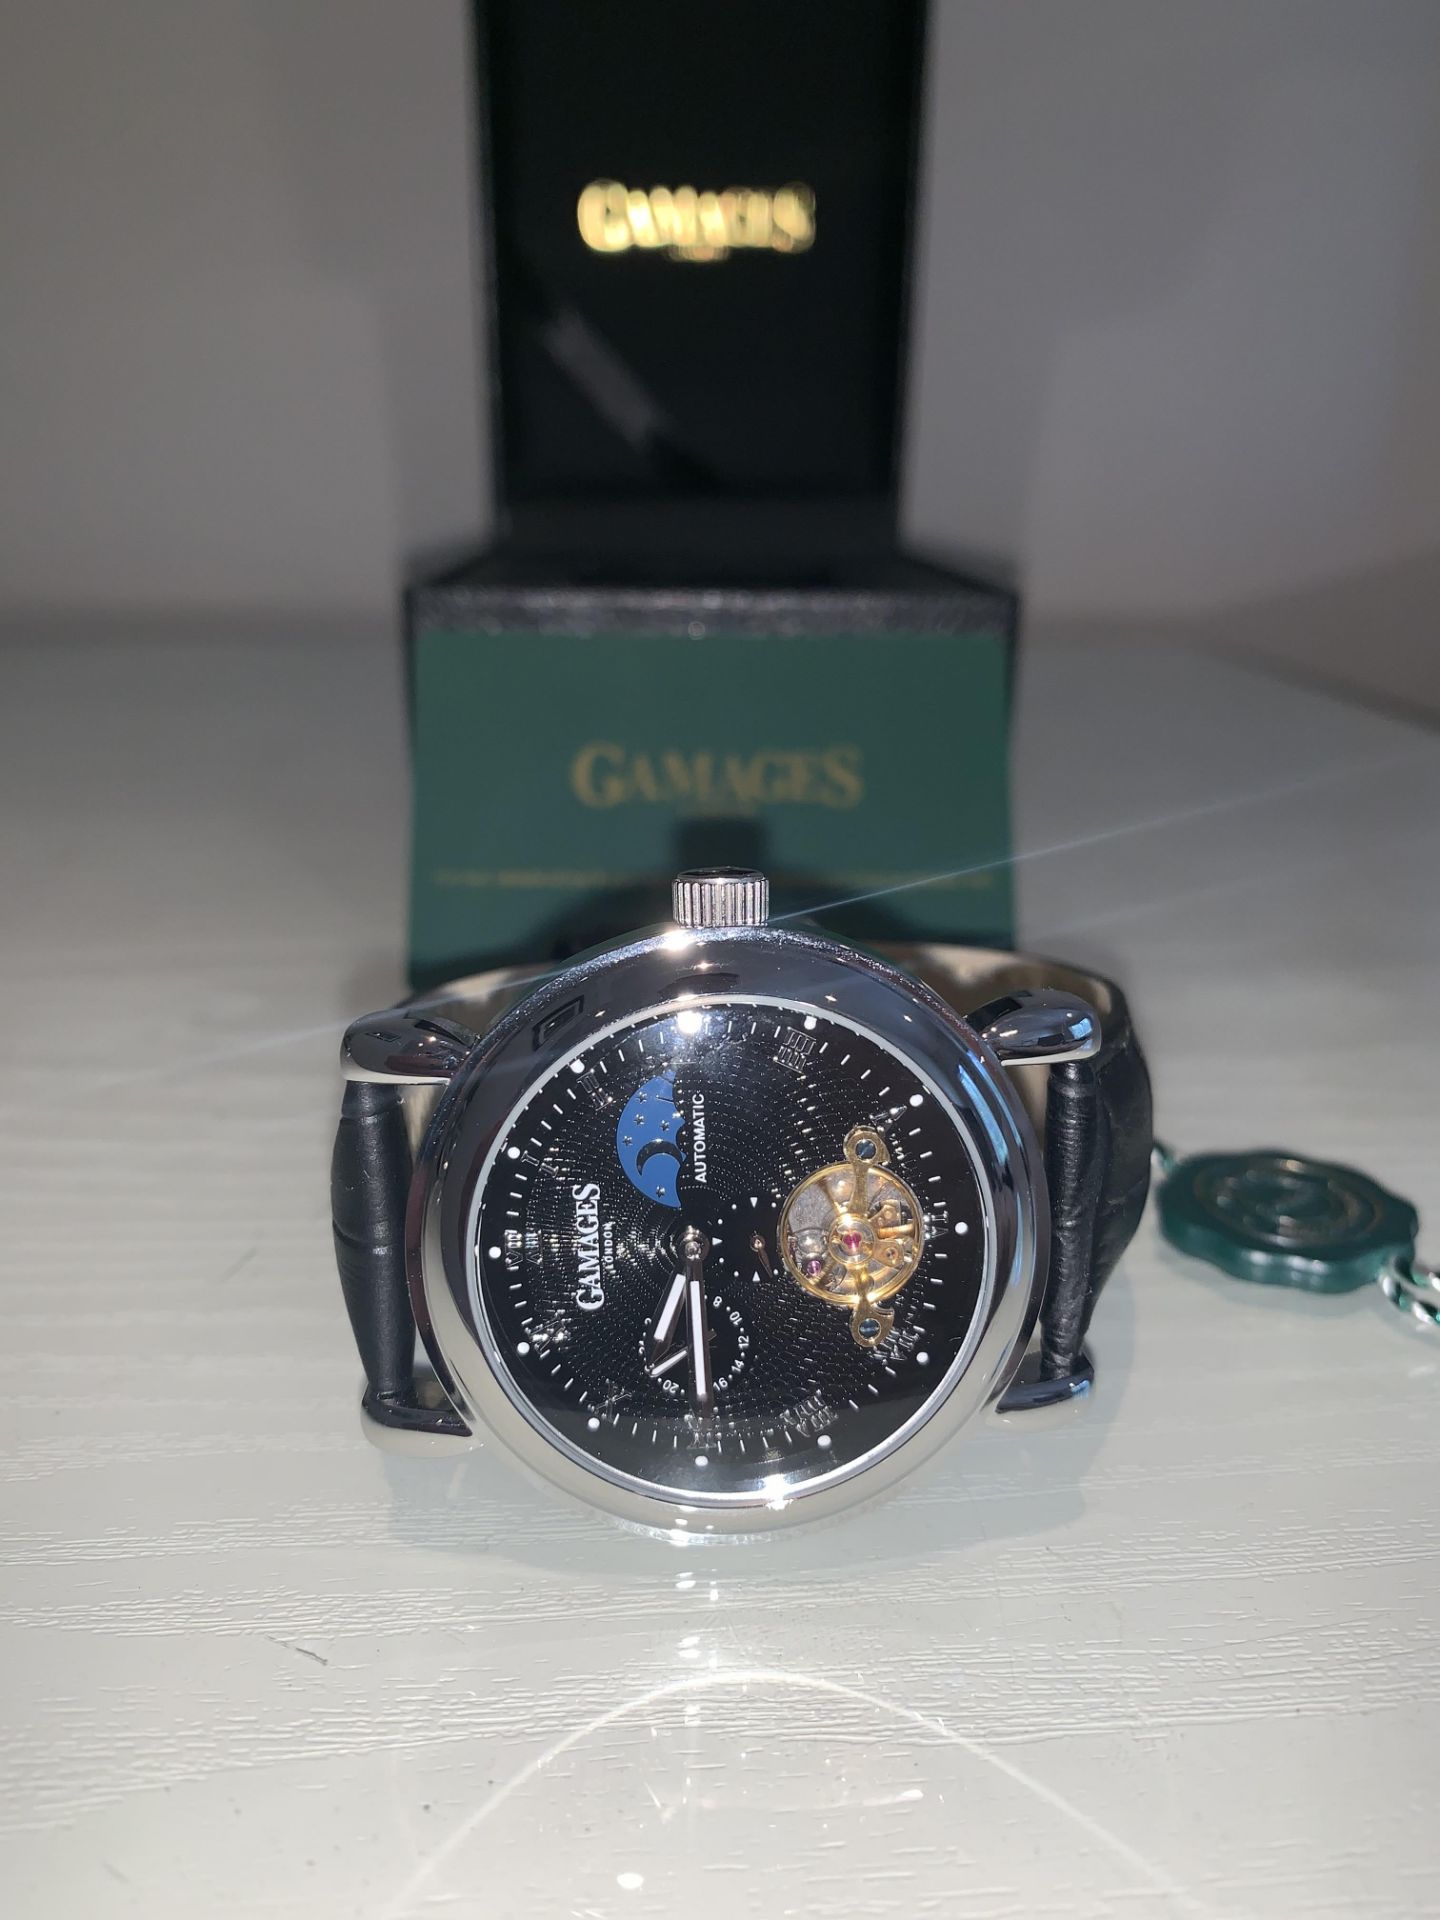 Limited Edition Hand Assembled GAMAGES Moon Phase Automatic Steel – 5 Year Warranty & Free Delivery - Image 5 of 12